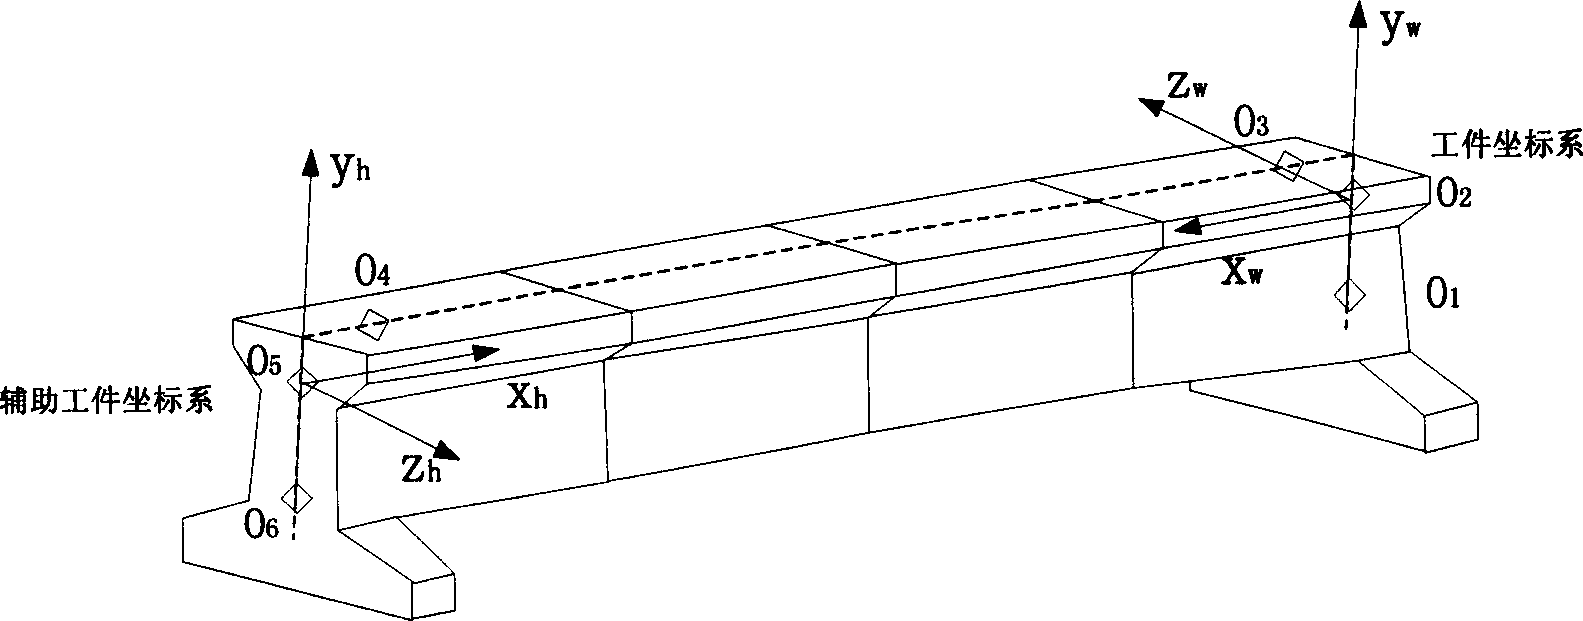 Locating method for large size work pieces in machine work